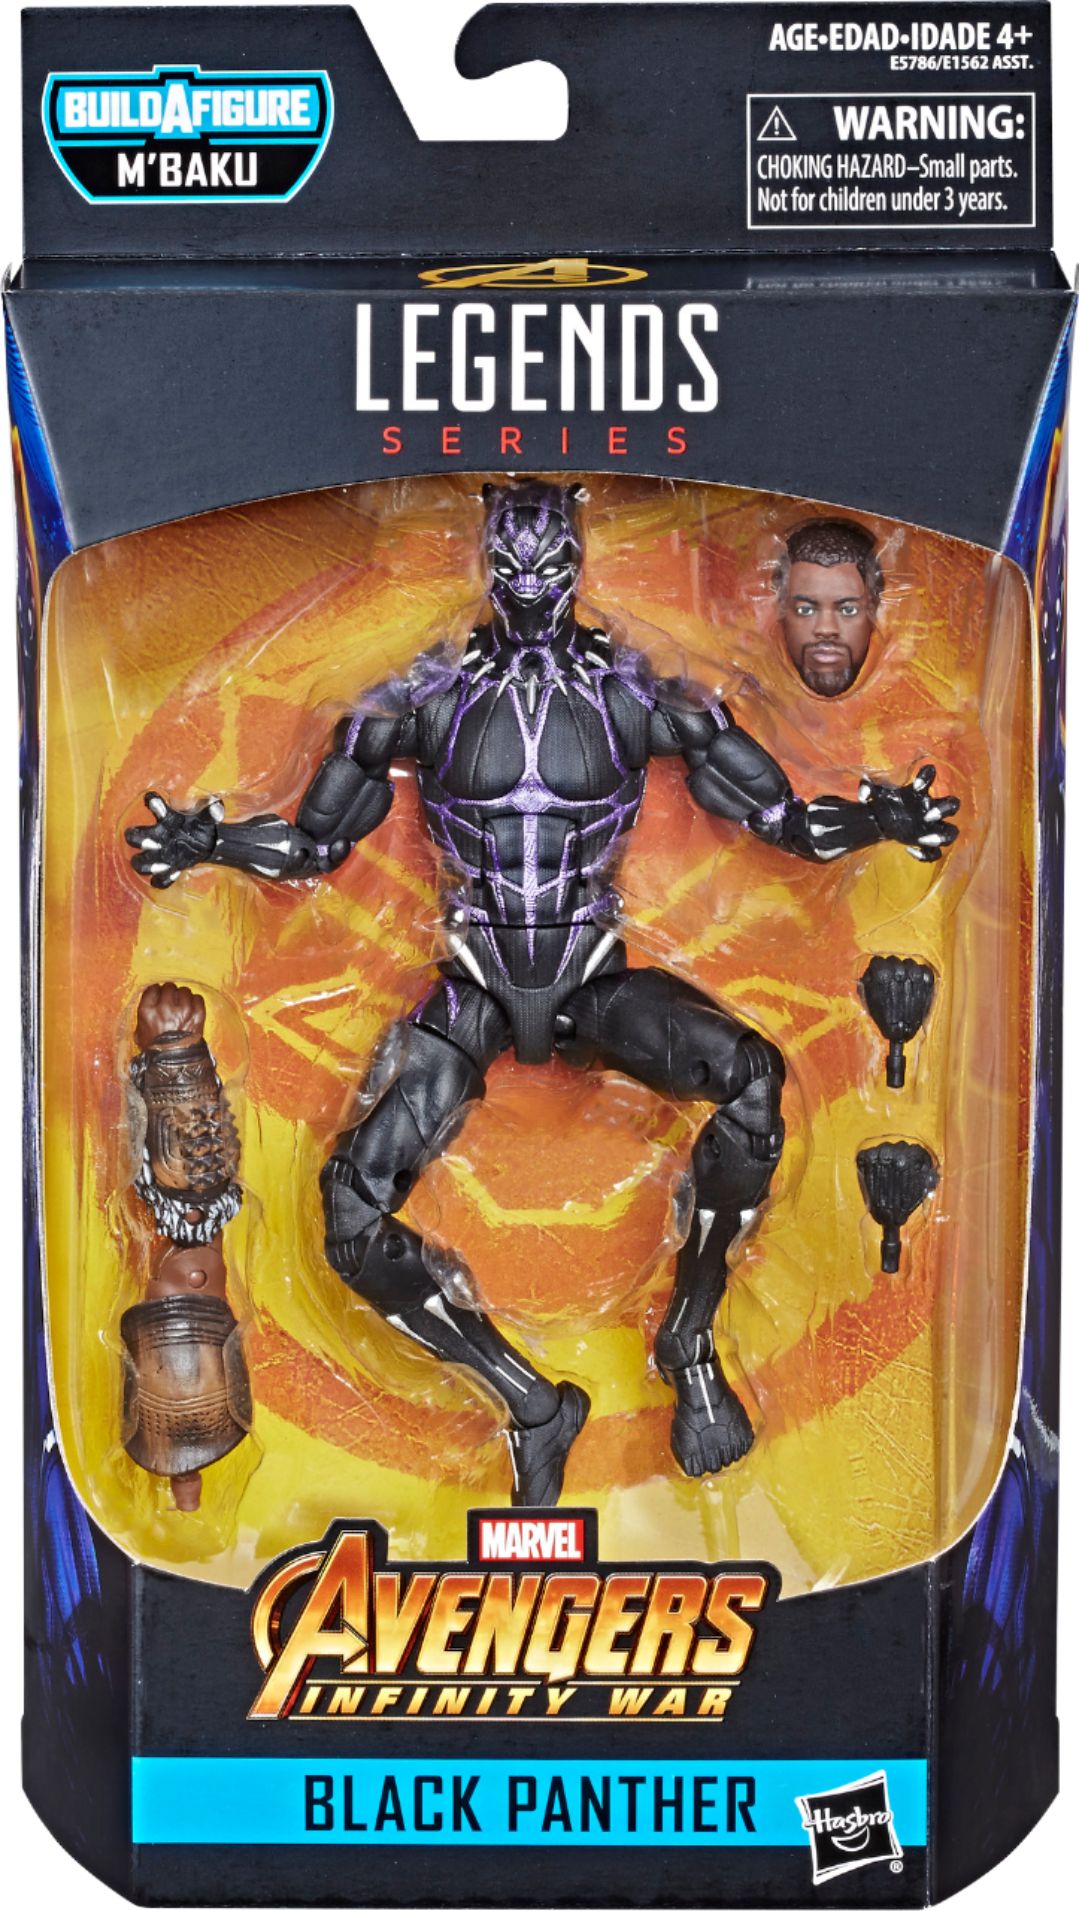 Marvel Legends 6-Inch Series Black Panther Exclusive Action Figure Hasbro Toys